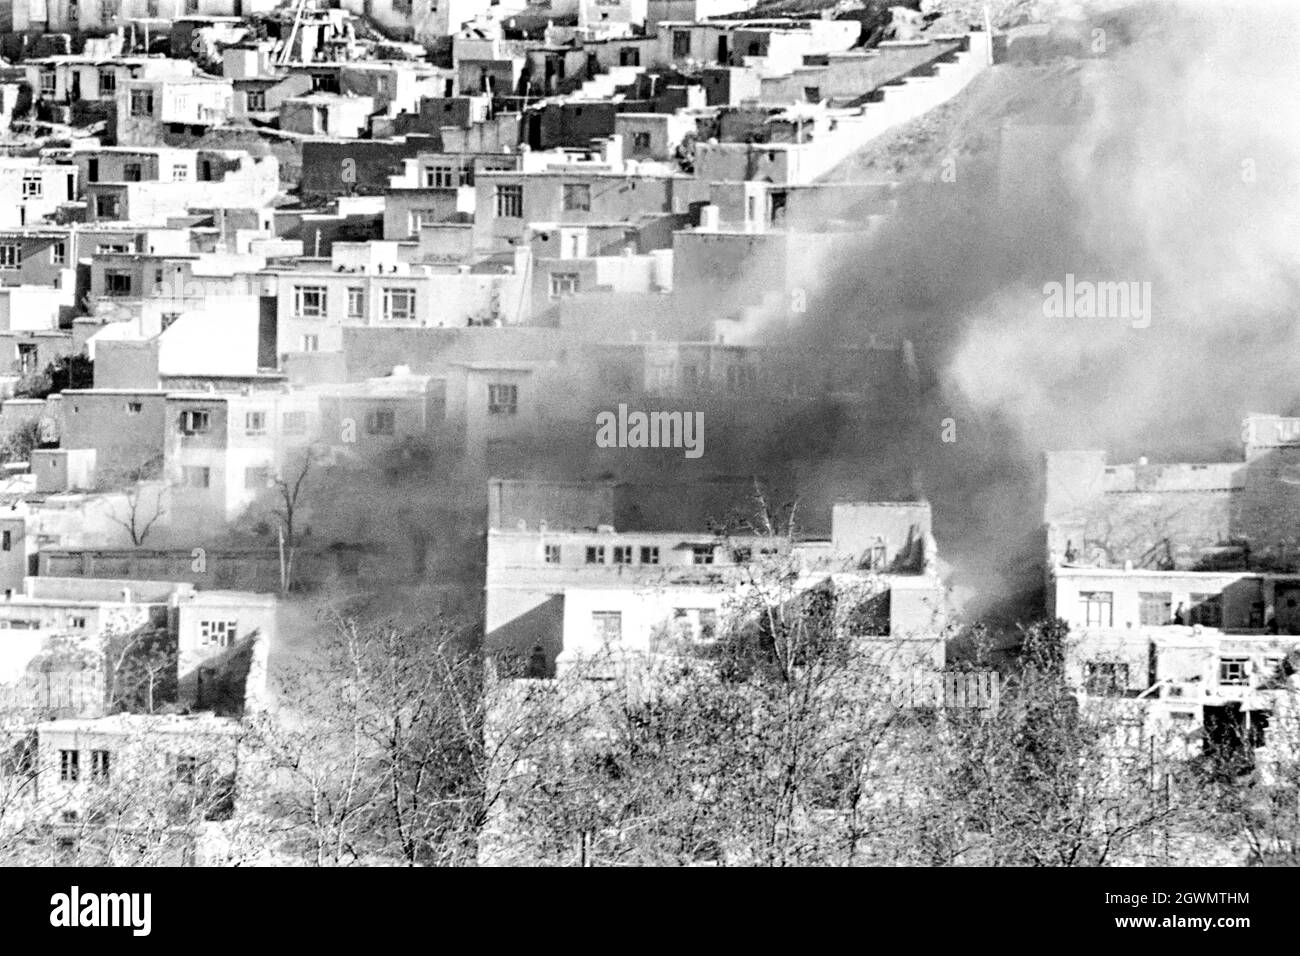 KABUL, AFGHANISTAN. 4h April 1988. A rocket hits a residential neighborhood of Karte-Ye-Sakhi crowded with mud brick homes on a hillside April 16, 1988 in Kabul, Afghanistan. The rocket, fired by the Afghan mujahideen killed two young sisters playing in a courtyard. Stock Photo